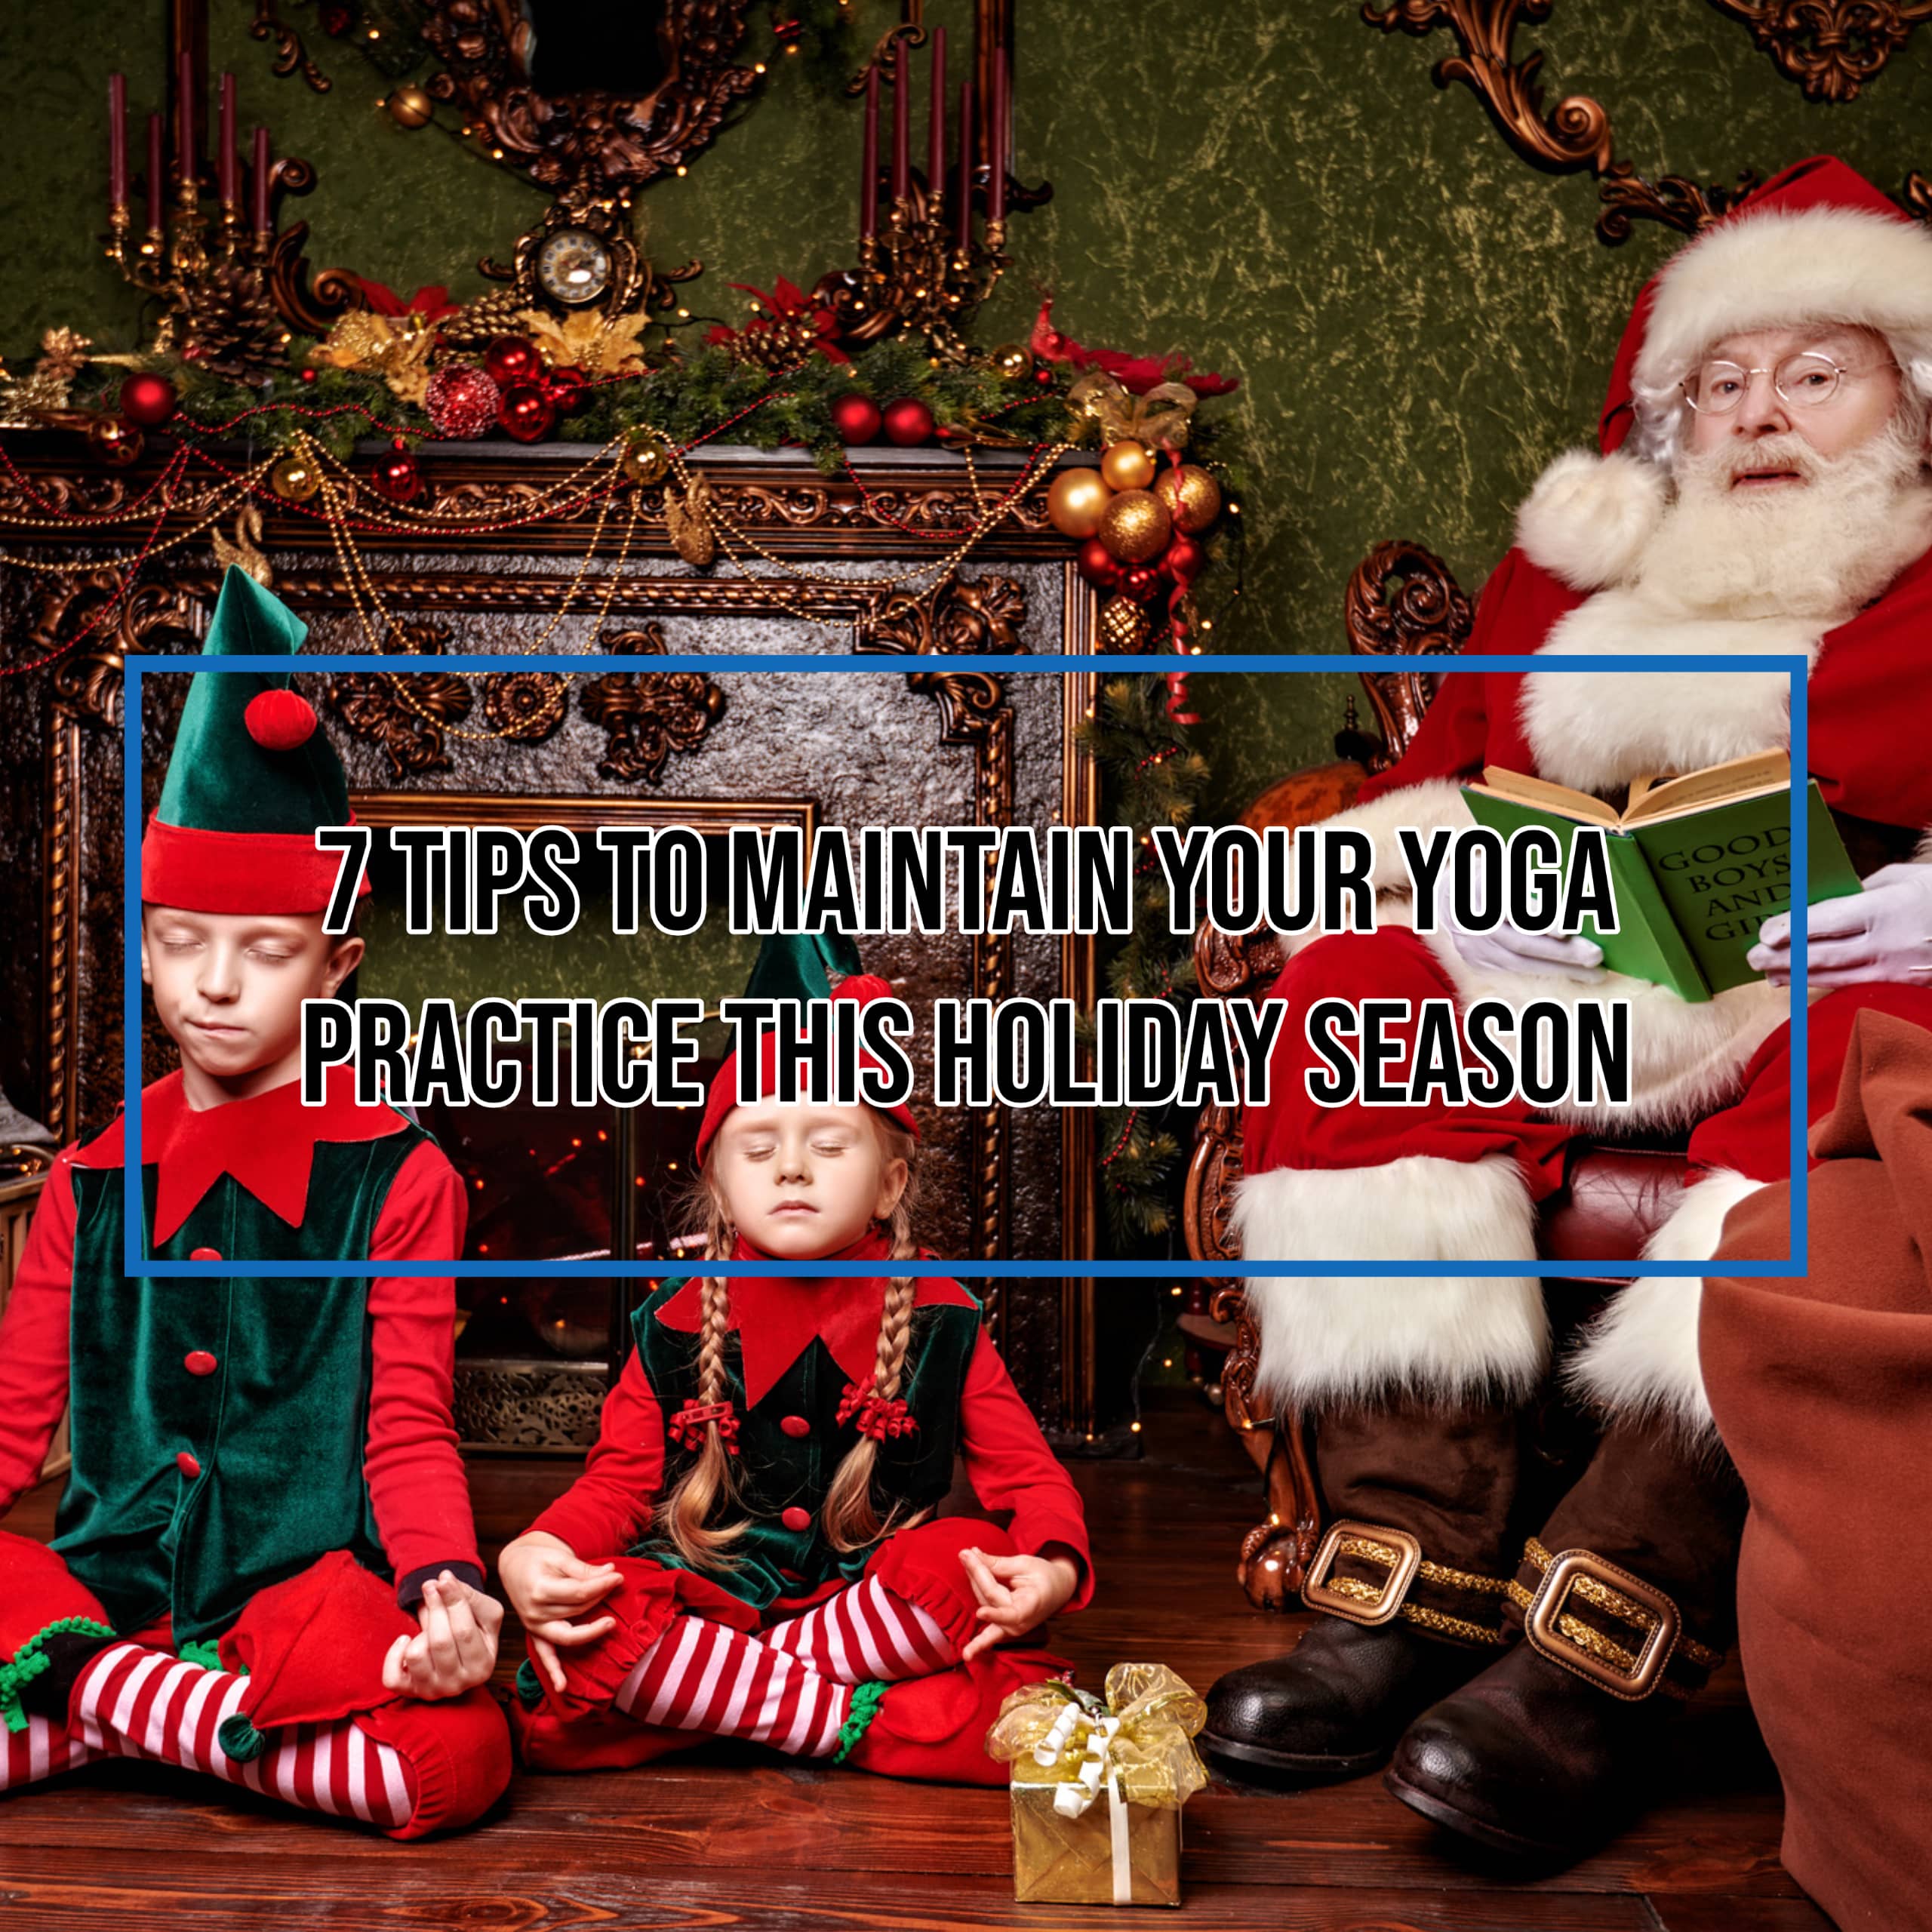 7 Tips To Maintain Your Yoga Practice This Holiday Season